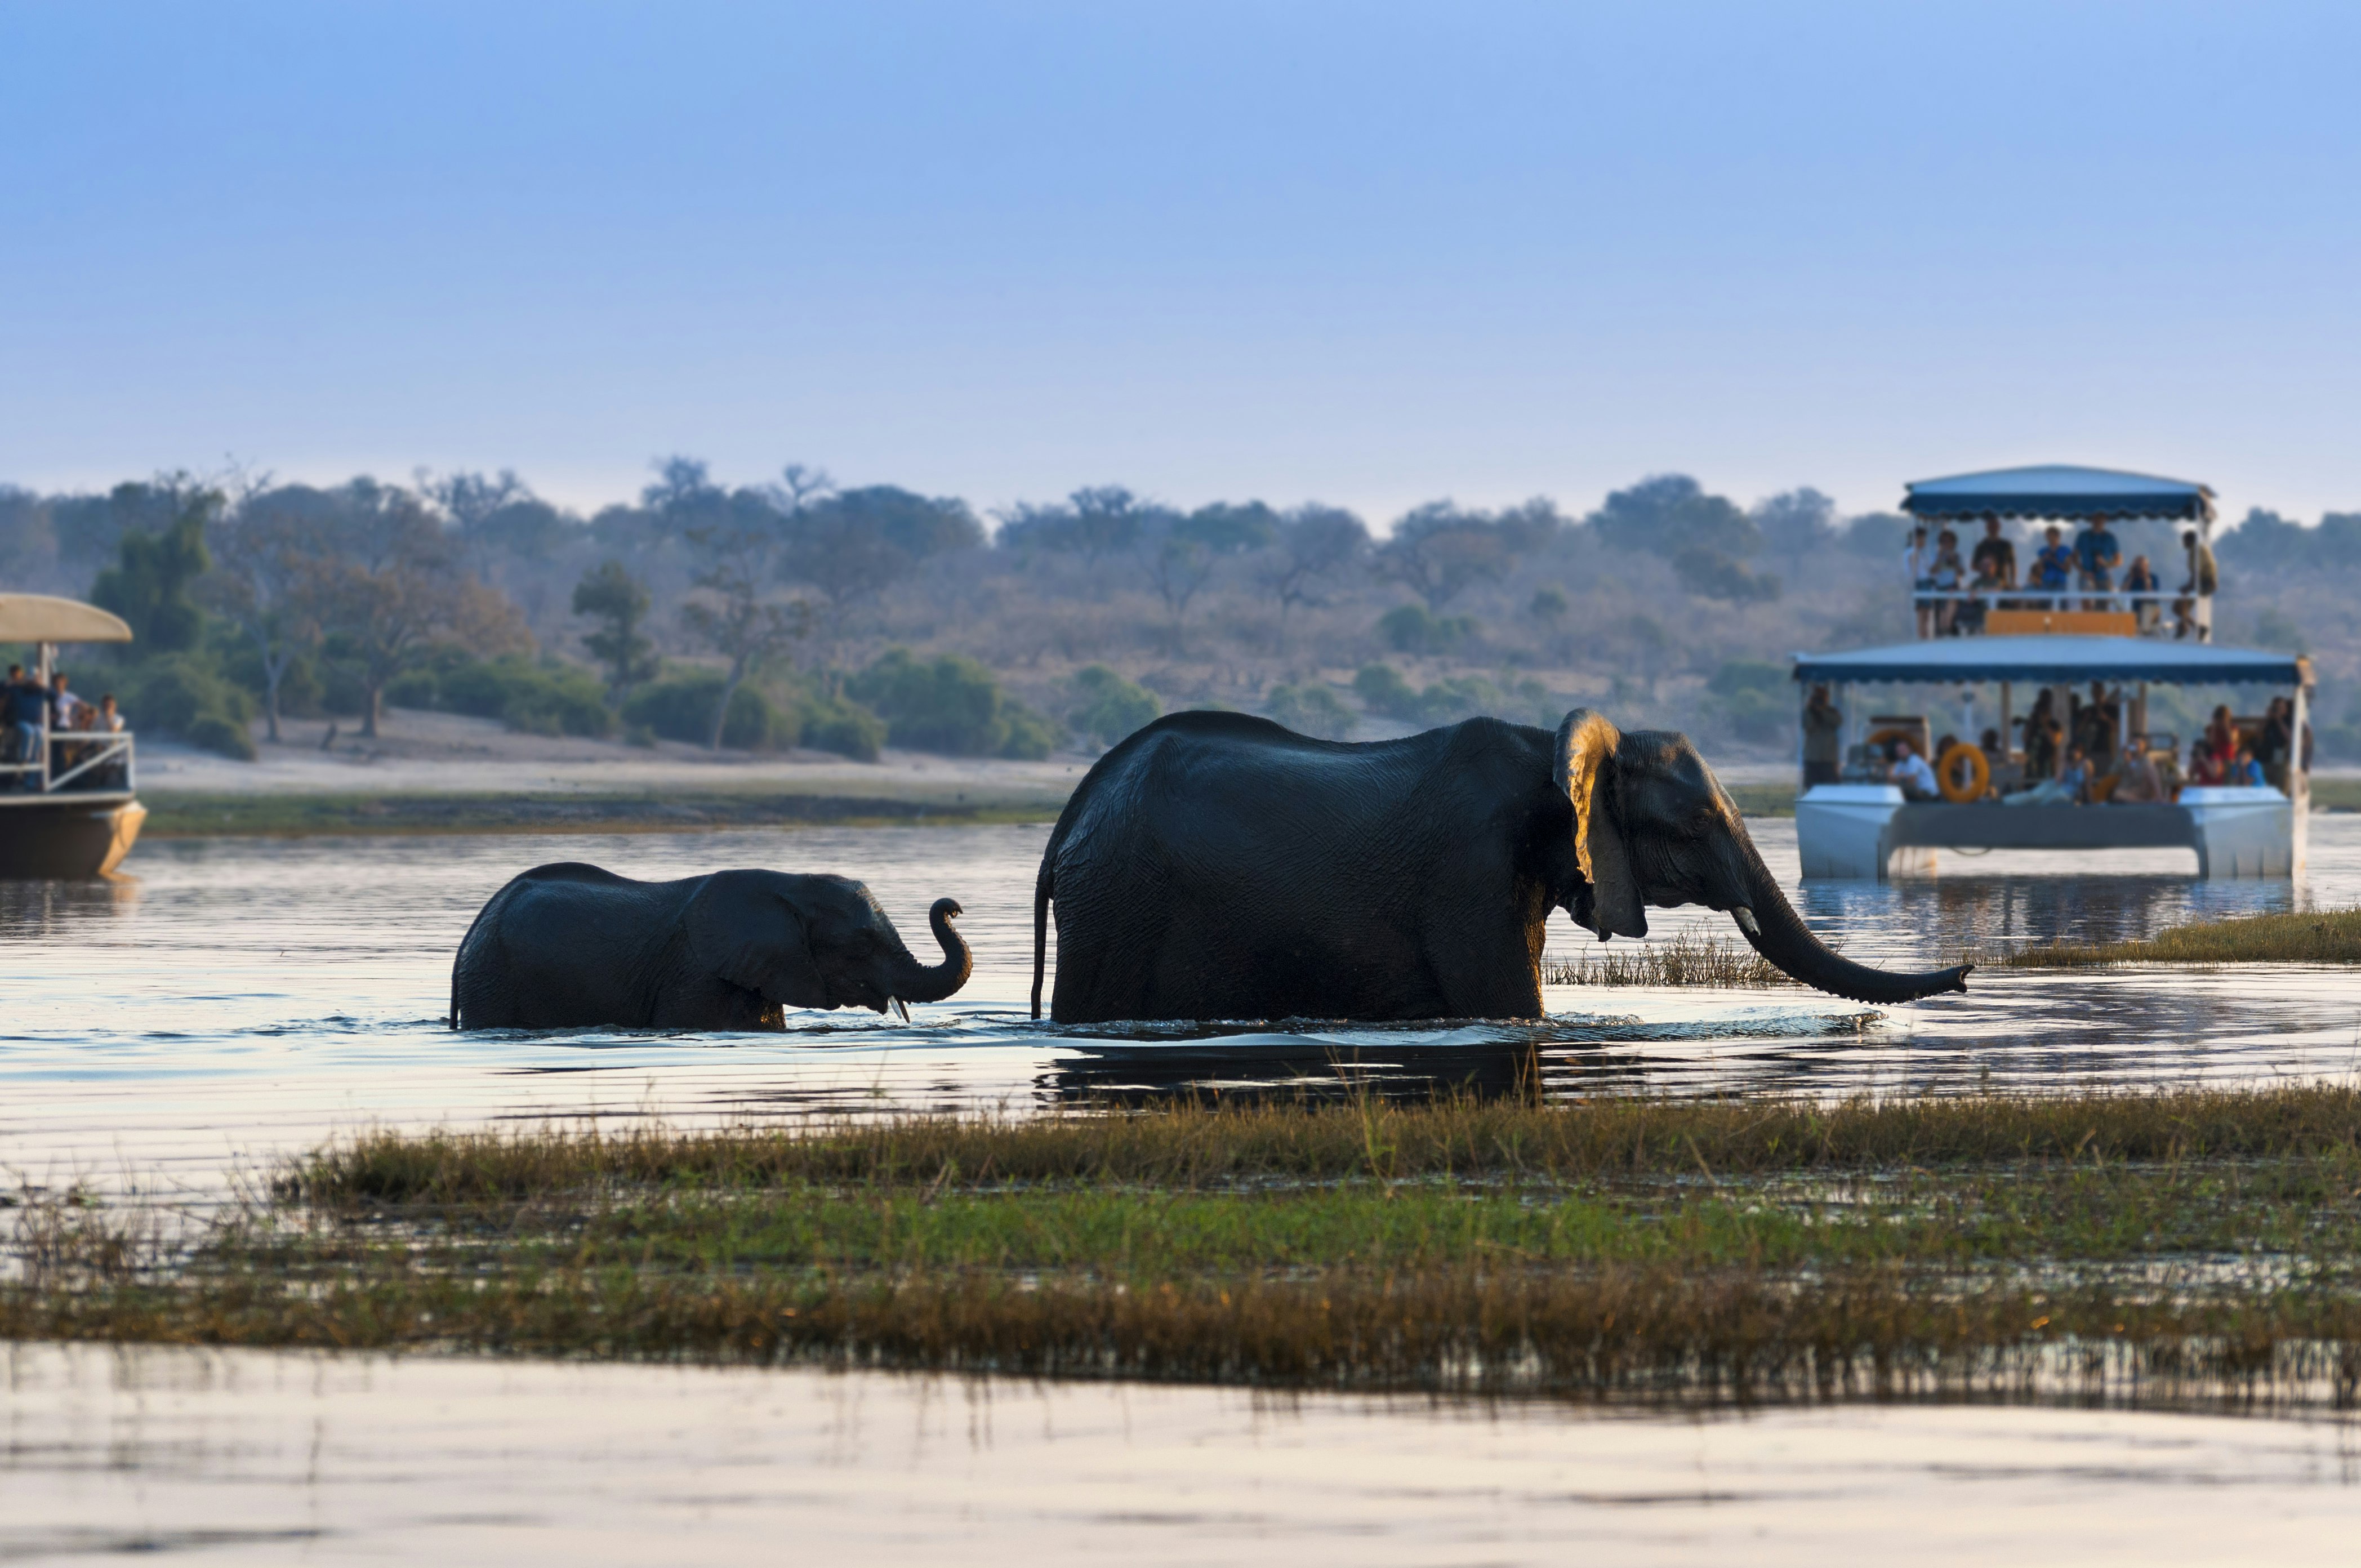 A large African elephant and its baby cross the Chobe River in Chobe National Park with tourists watching on from nearby boats